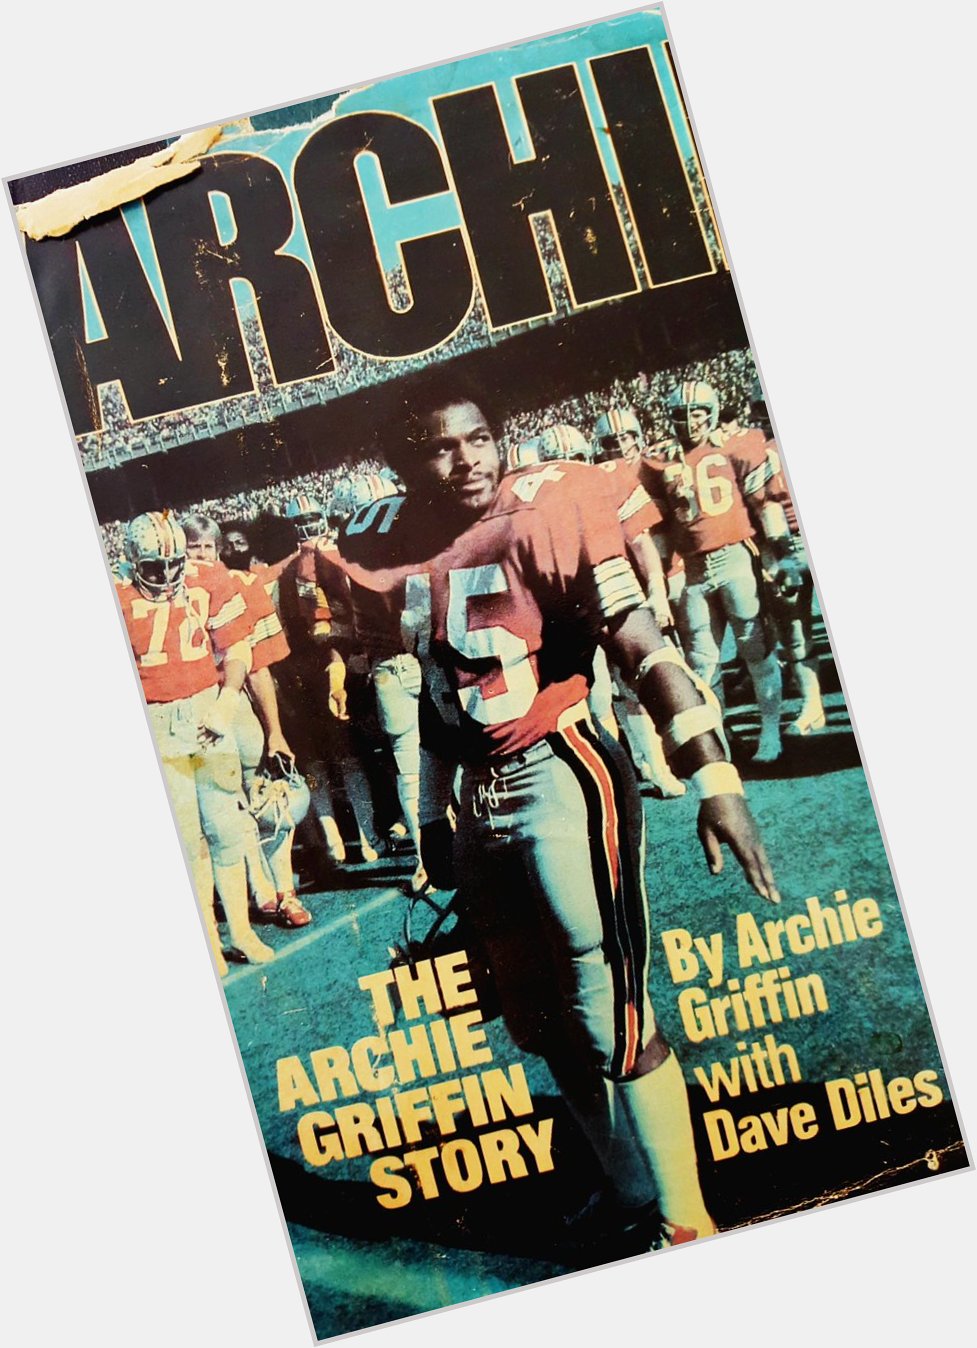 Happy belated birthday to the only two-time Heisman Trophy winner, the legendary Archie Griffin. 